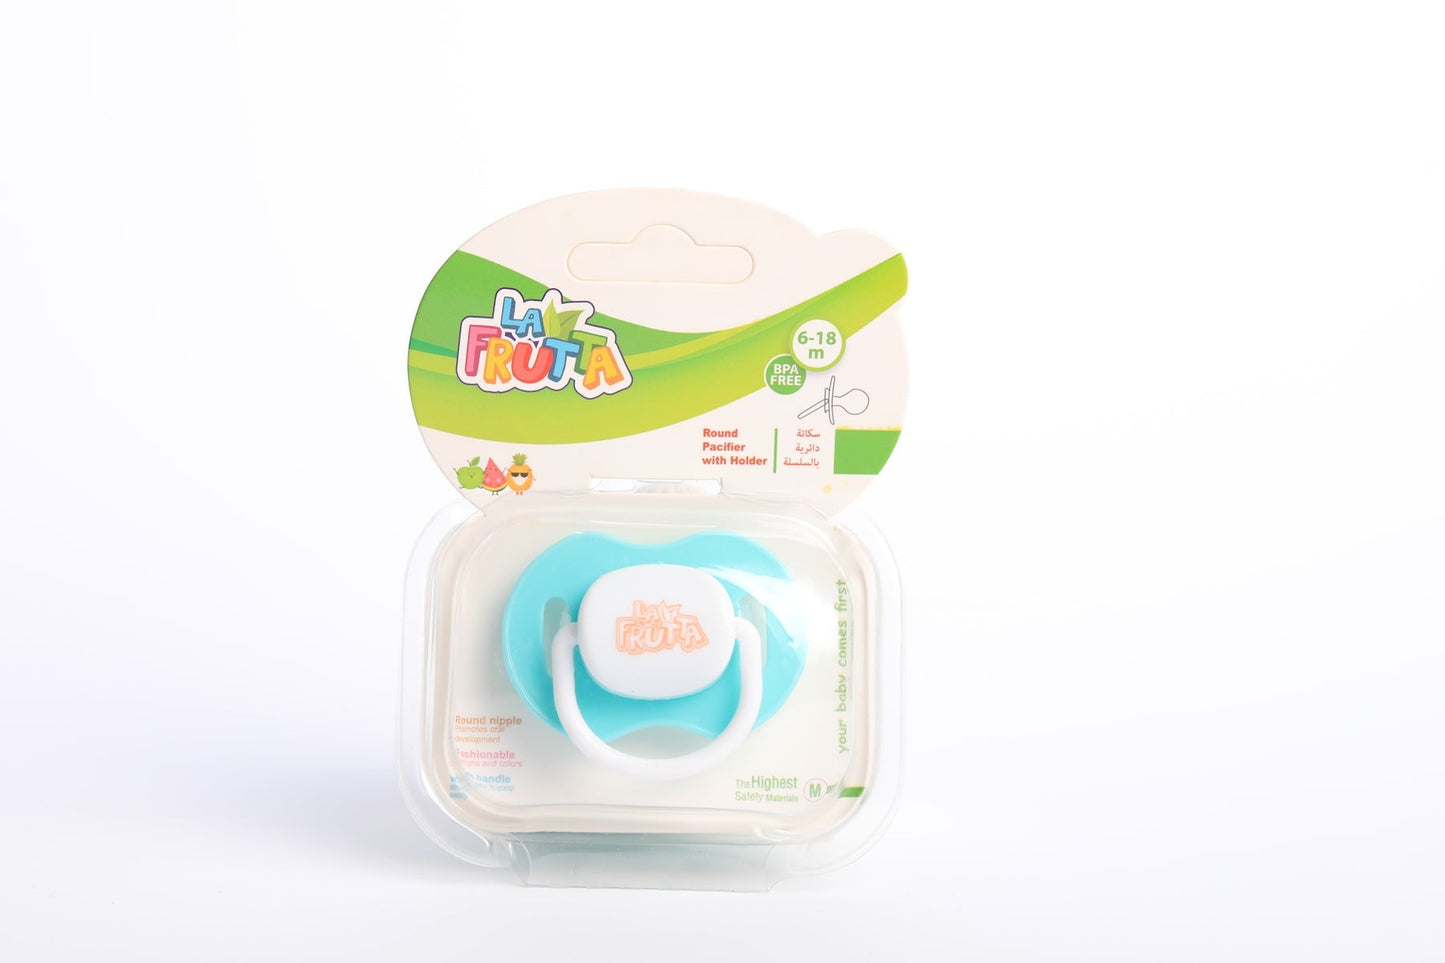 La Frutta Printed Pacifier with Cover and Round Teat, Blue and Clear - 6 to 18 Months